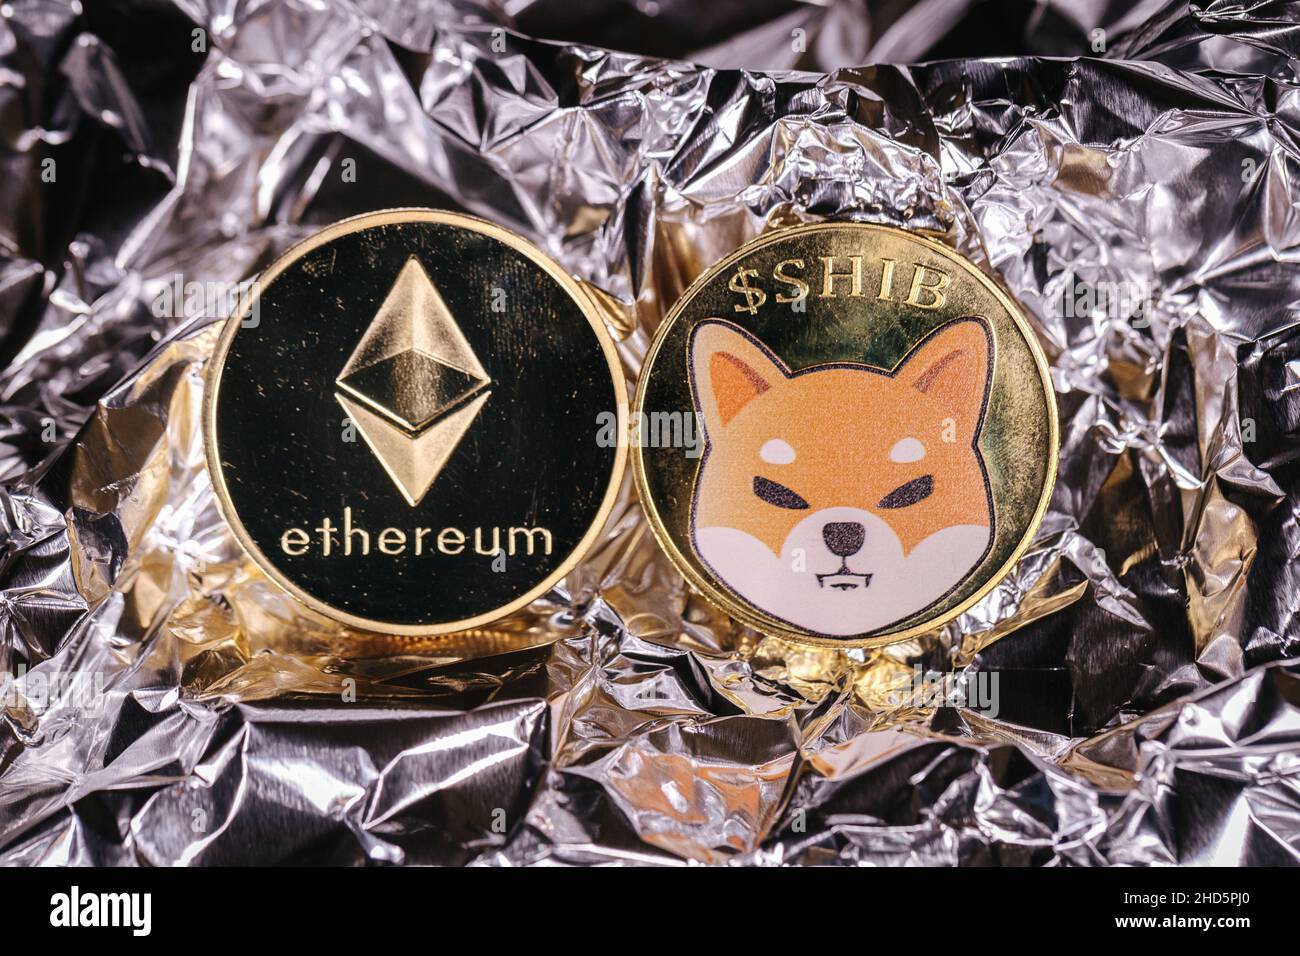 Ethereum and Shiba Inu cryptocurrency, physical coins in front of an abstract background. Stock Photo